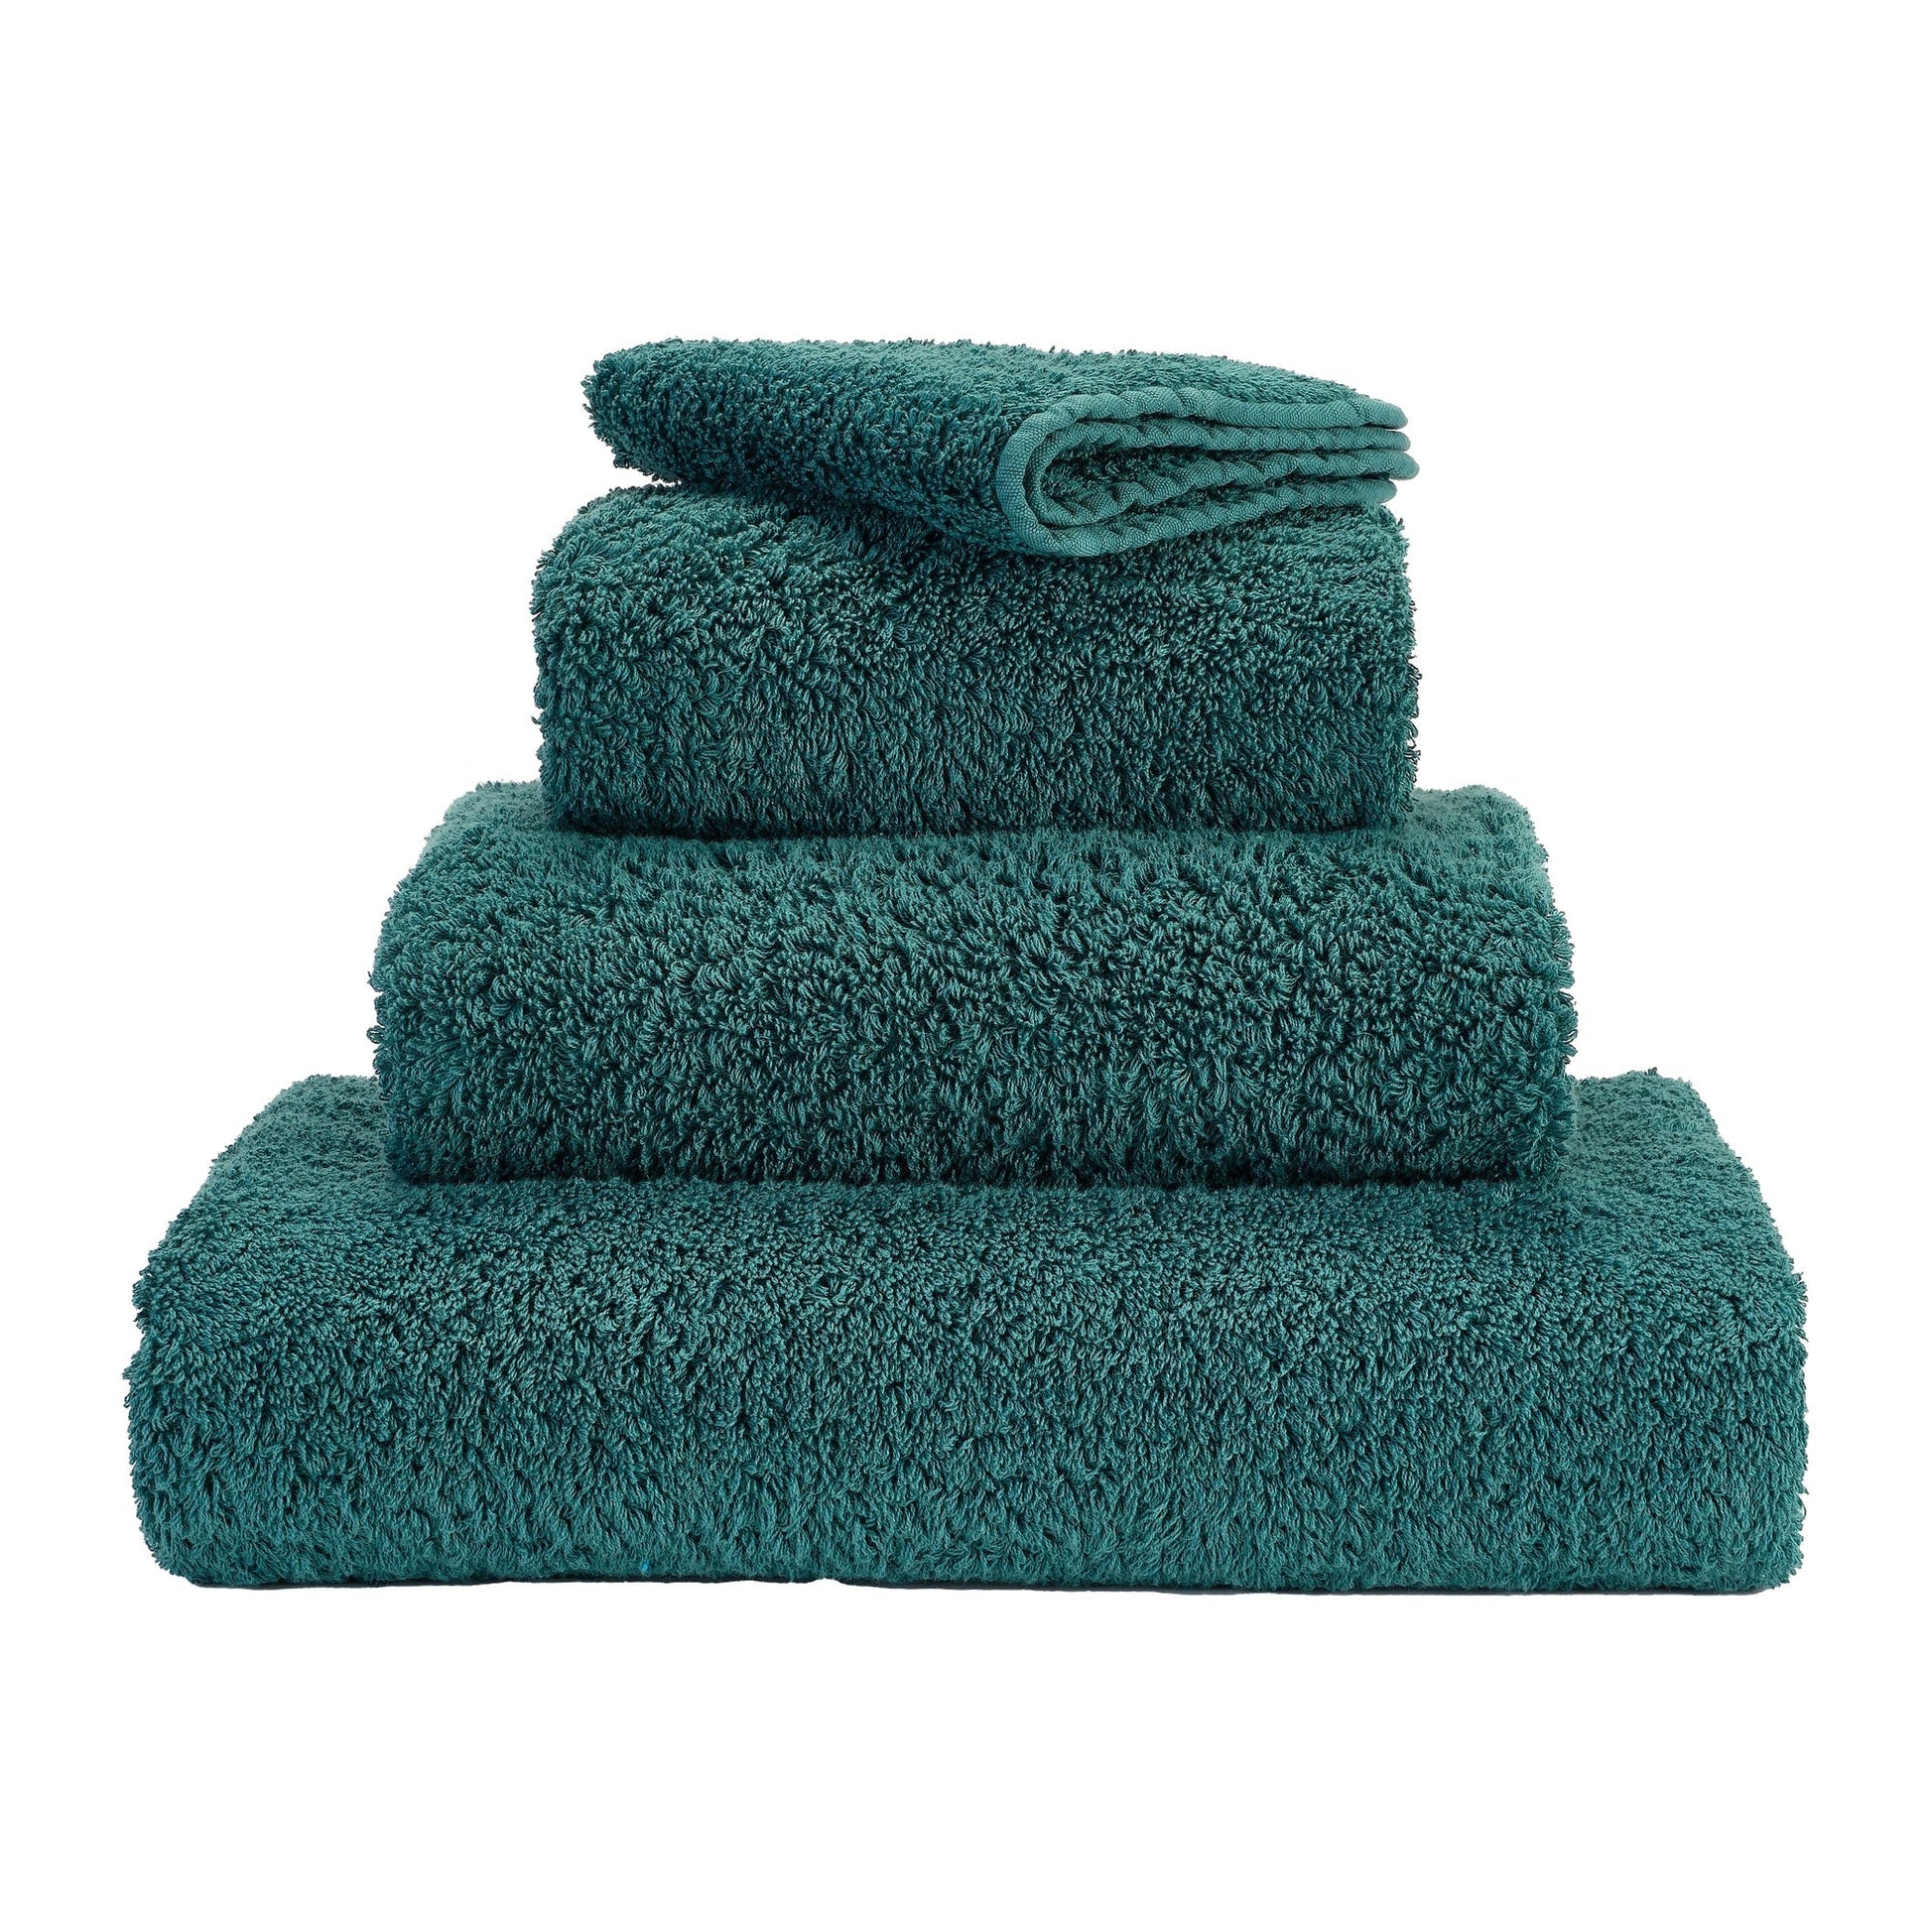 Super Pile Egyptian Cotton Towel by Abyss & Habidecor | 320 Duck - |VESIMI Design| Luxury and Rustic bathrooms online